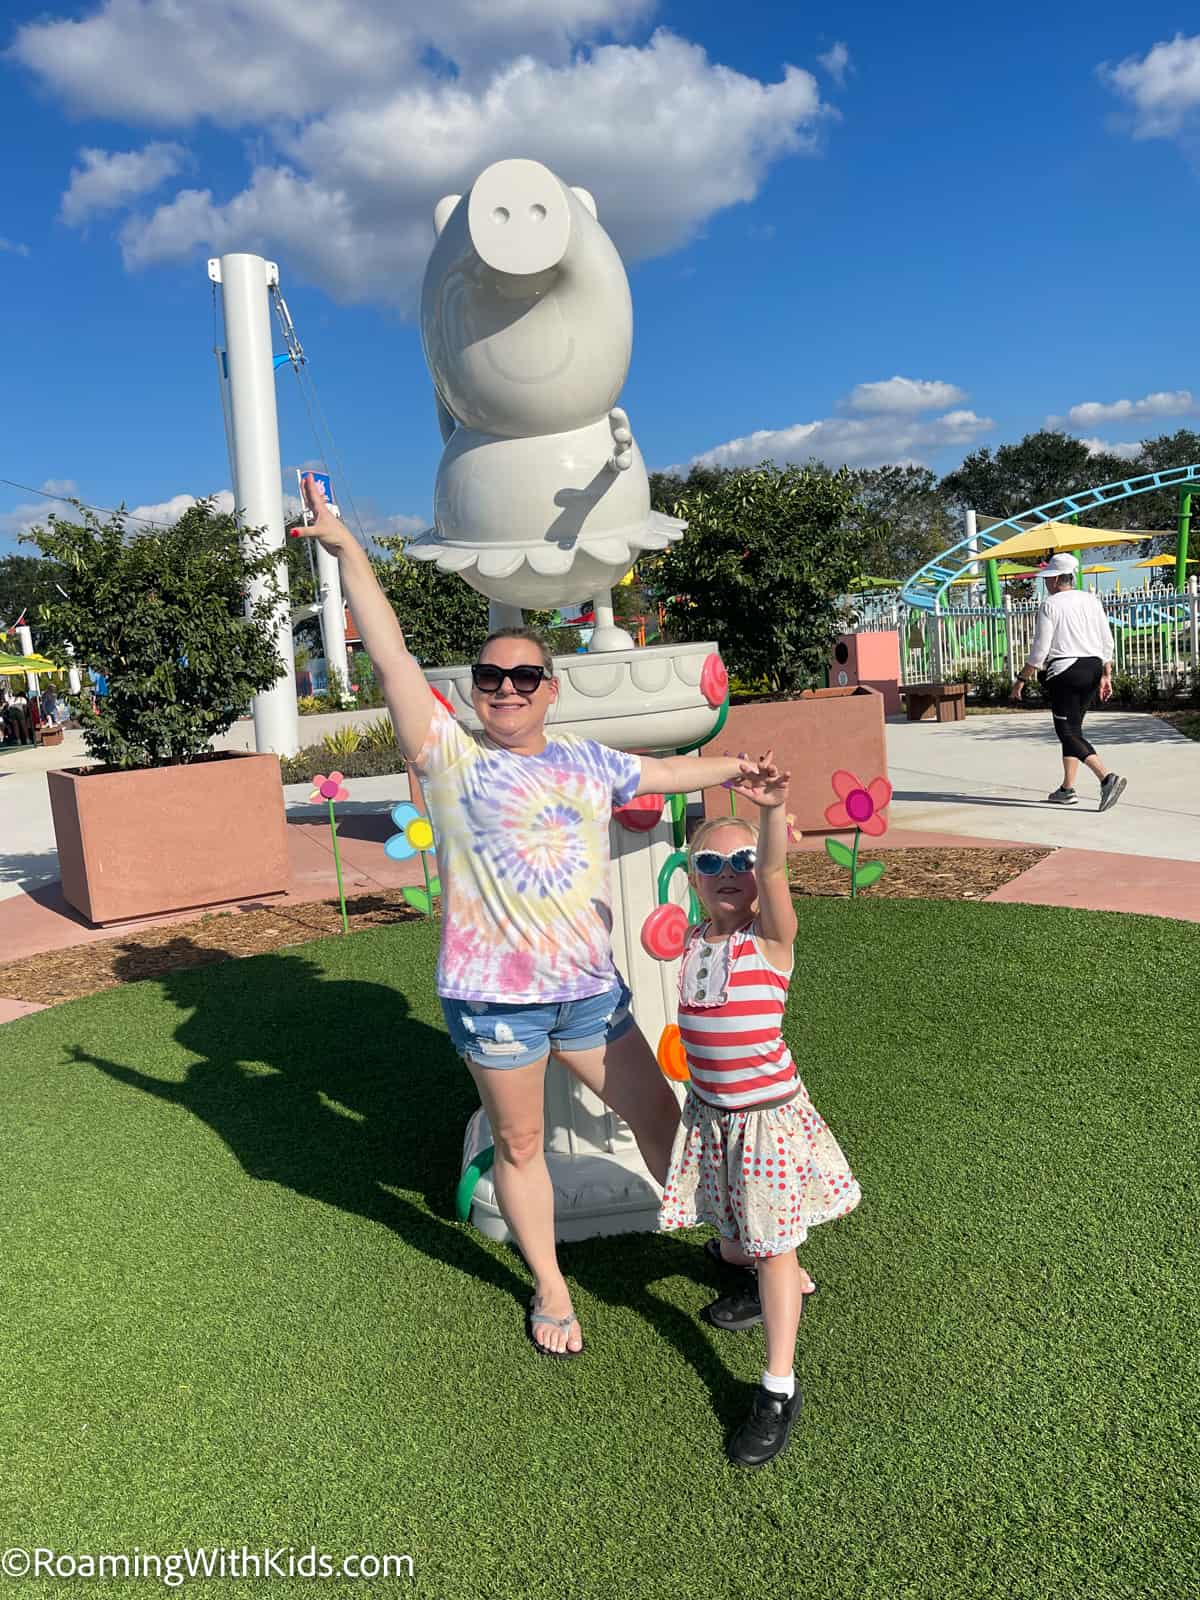 mom and daughter at the Peppa Pig Statue at Peppa Pig theme park in florida